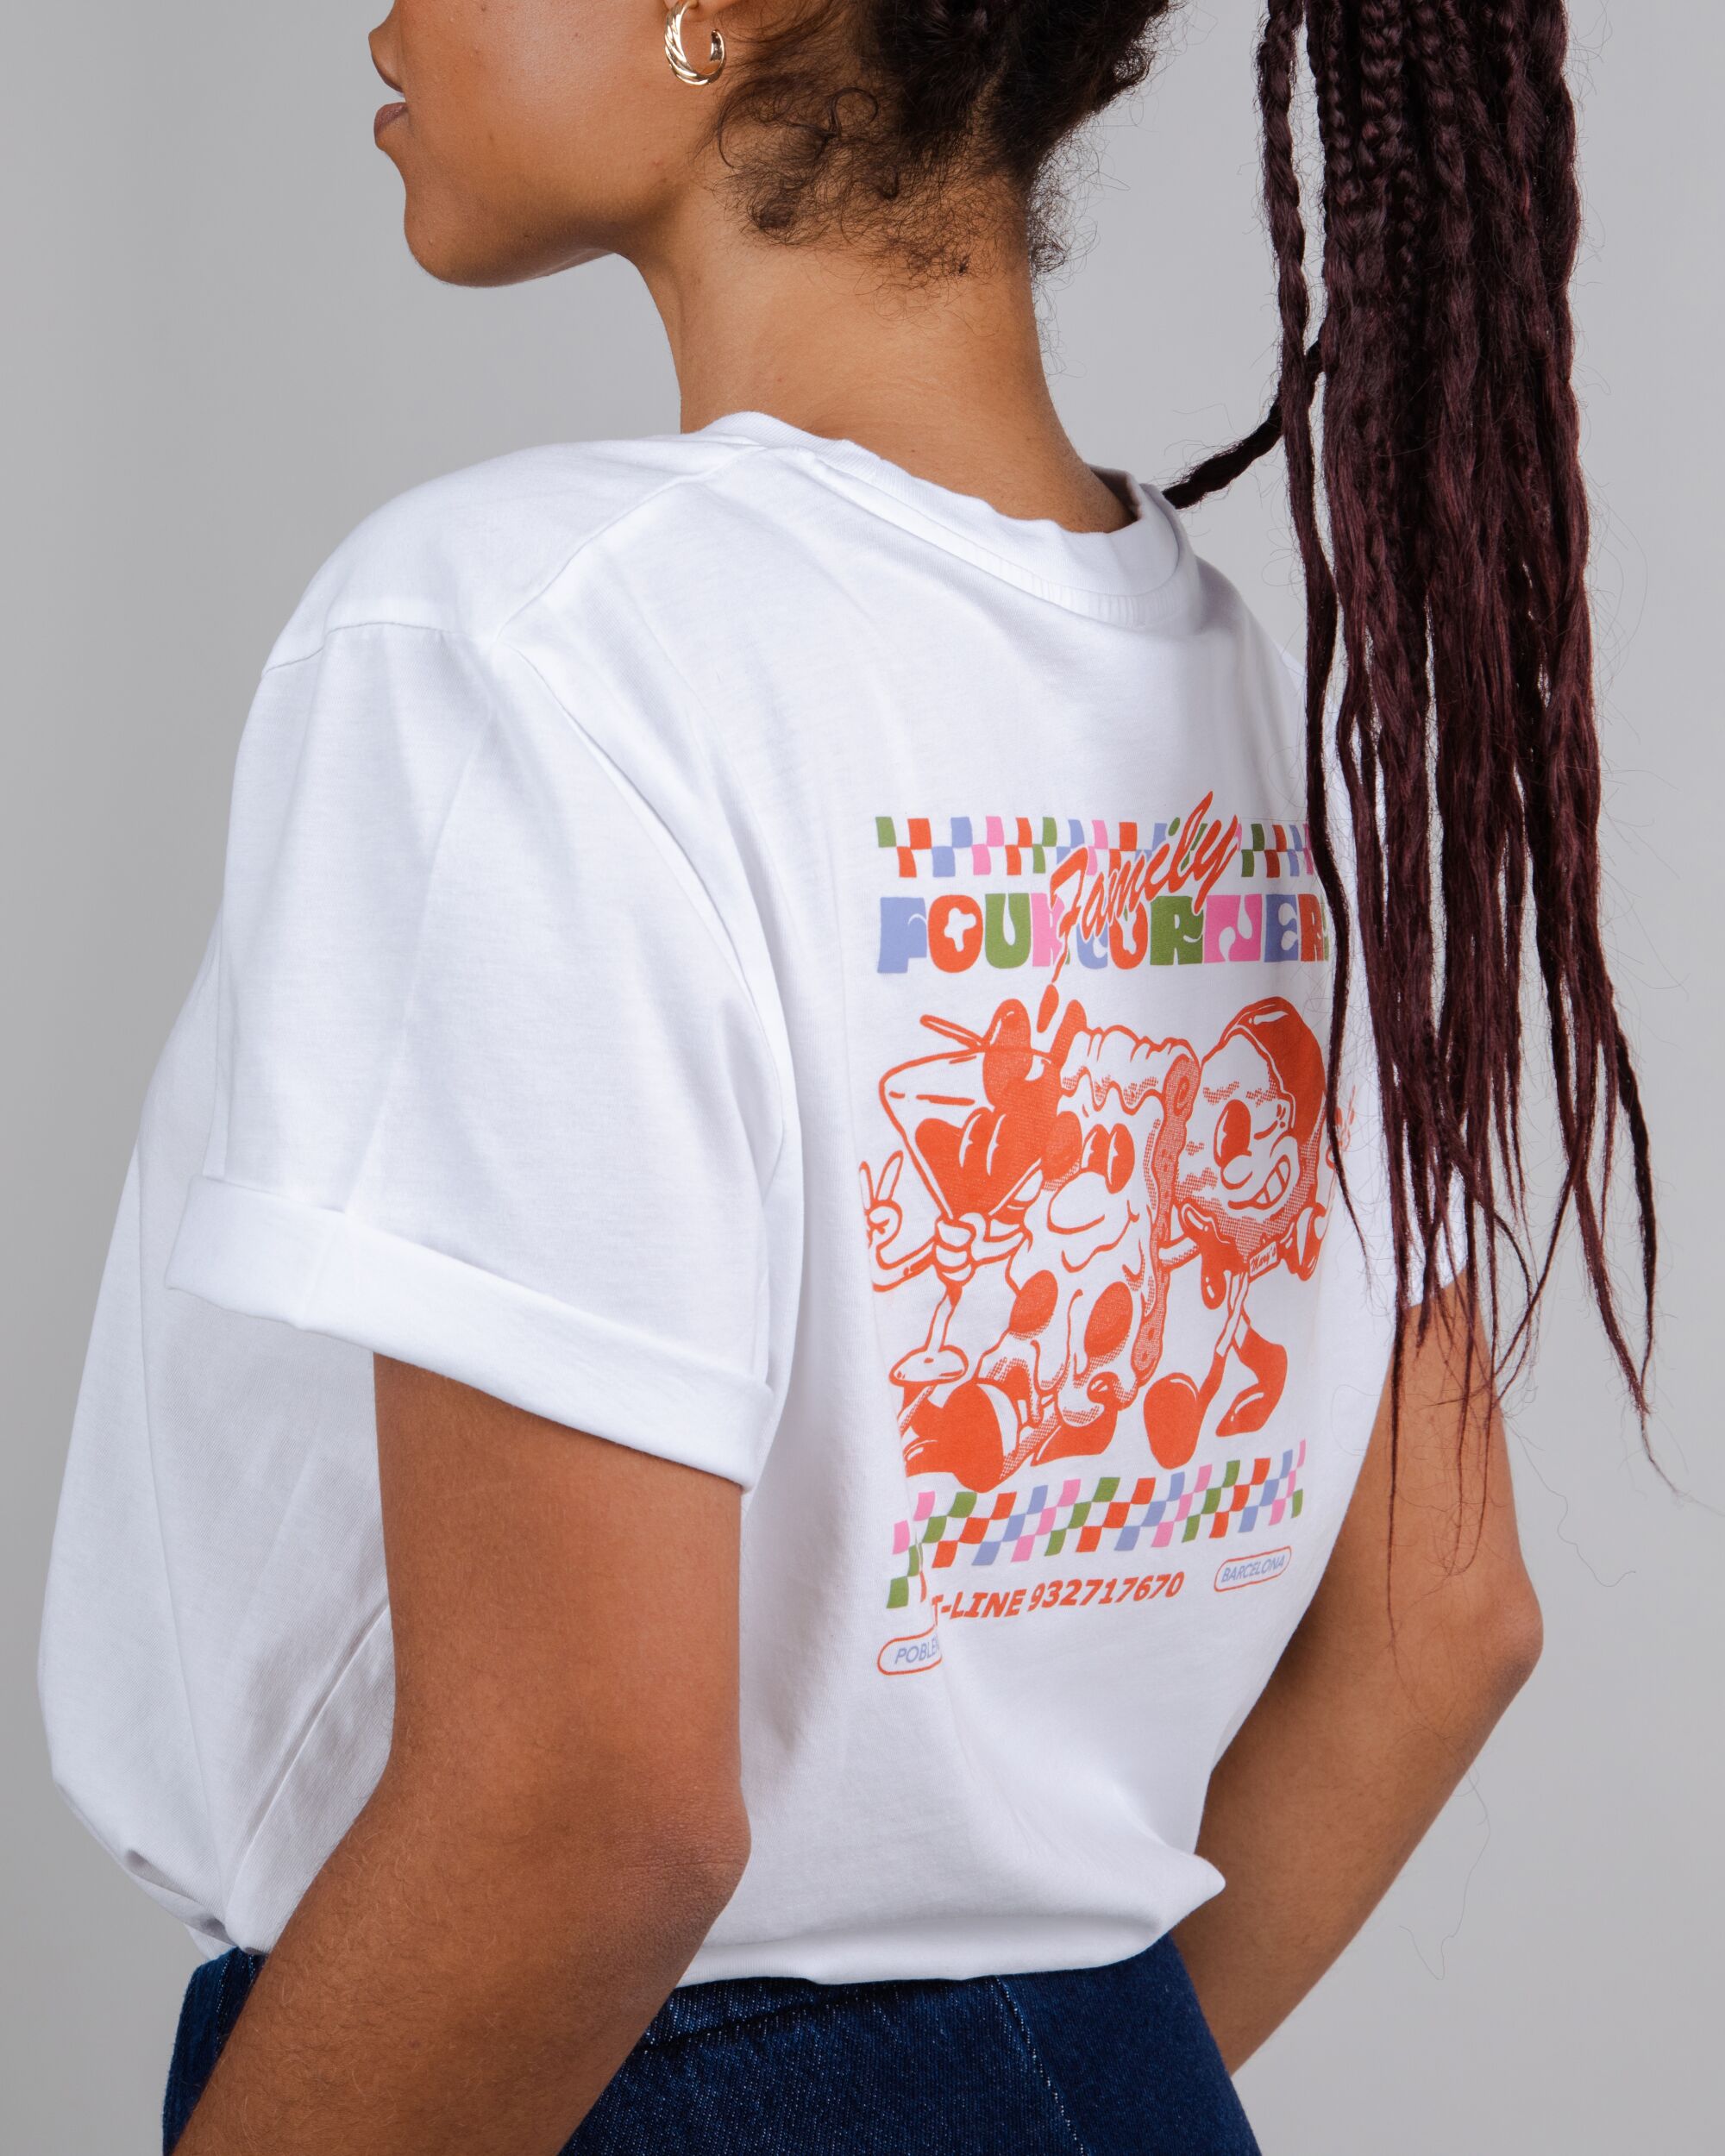 Colorful Hoxton Four Corners T-shirt made from 100% organic cotton from Brava Fabrics